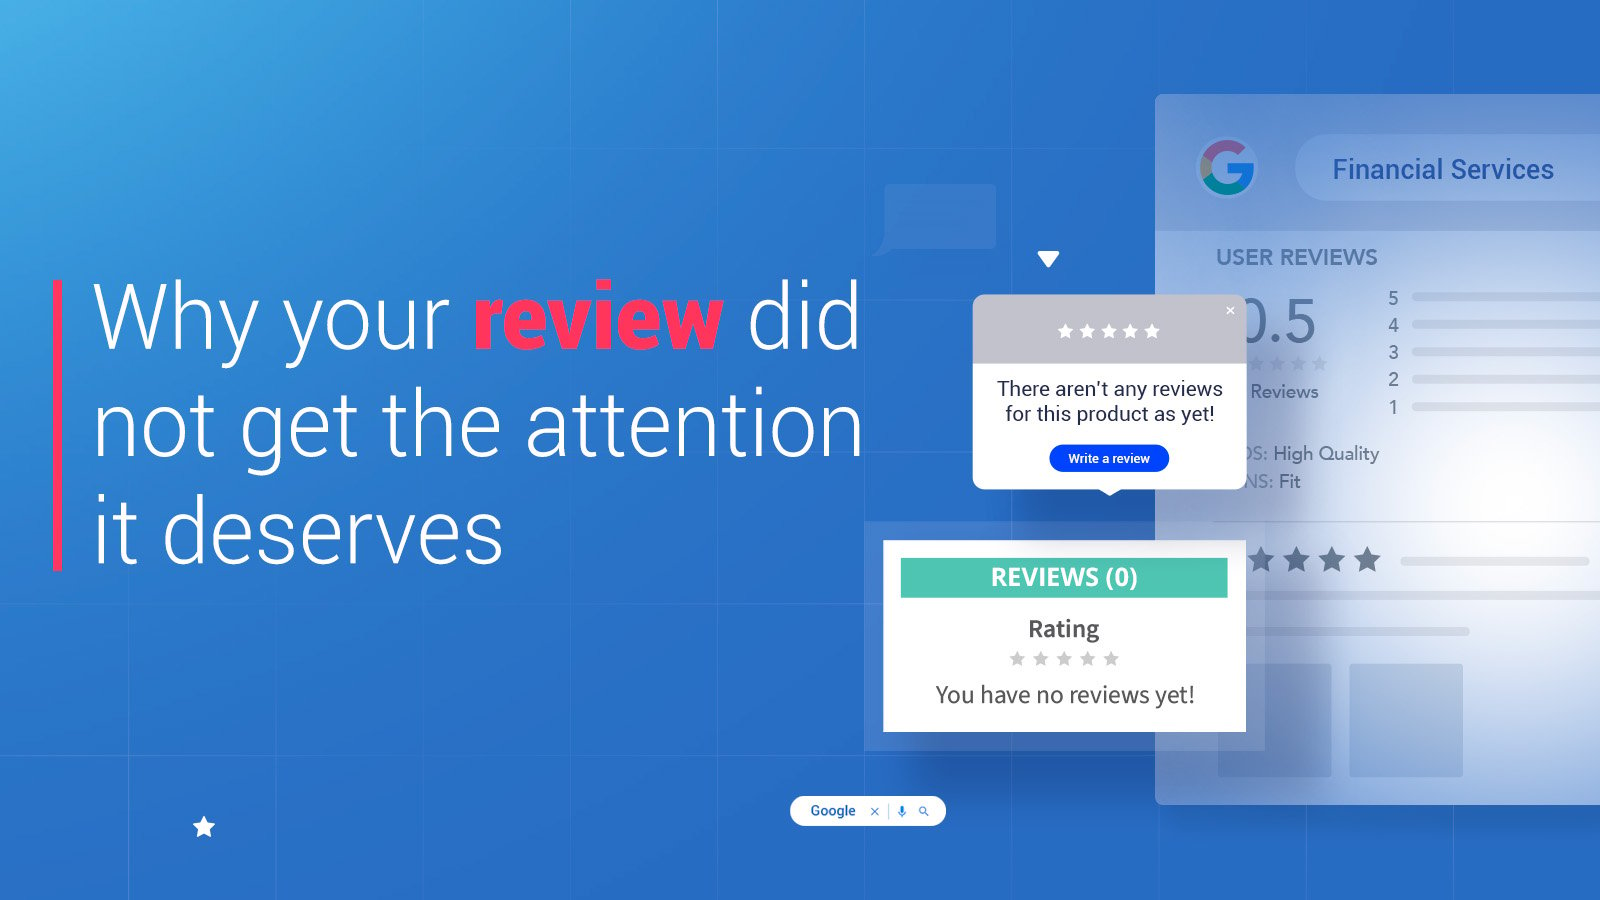 Why your review maybe did not get the attention it deserves